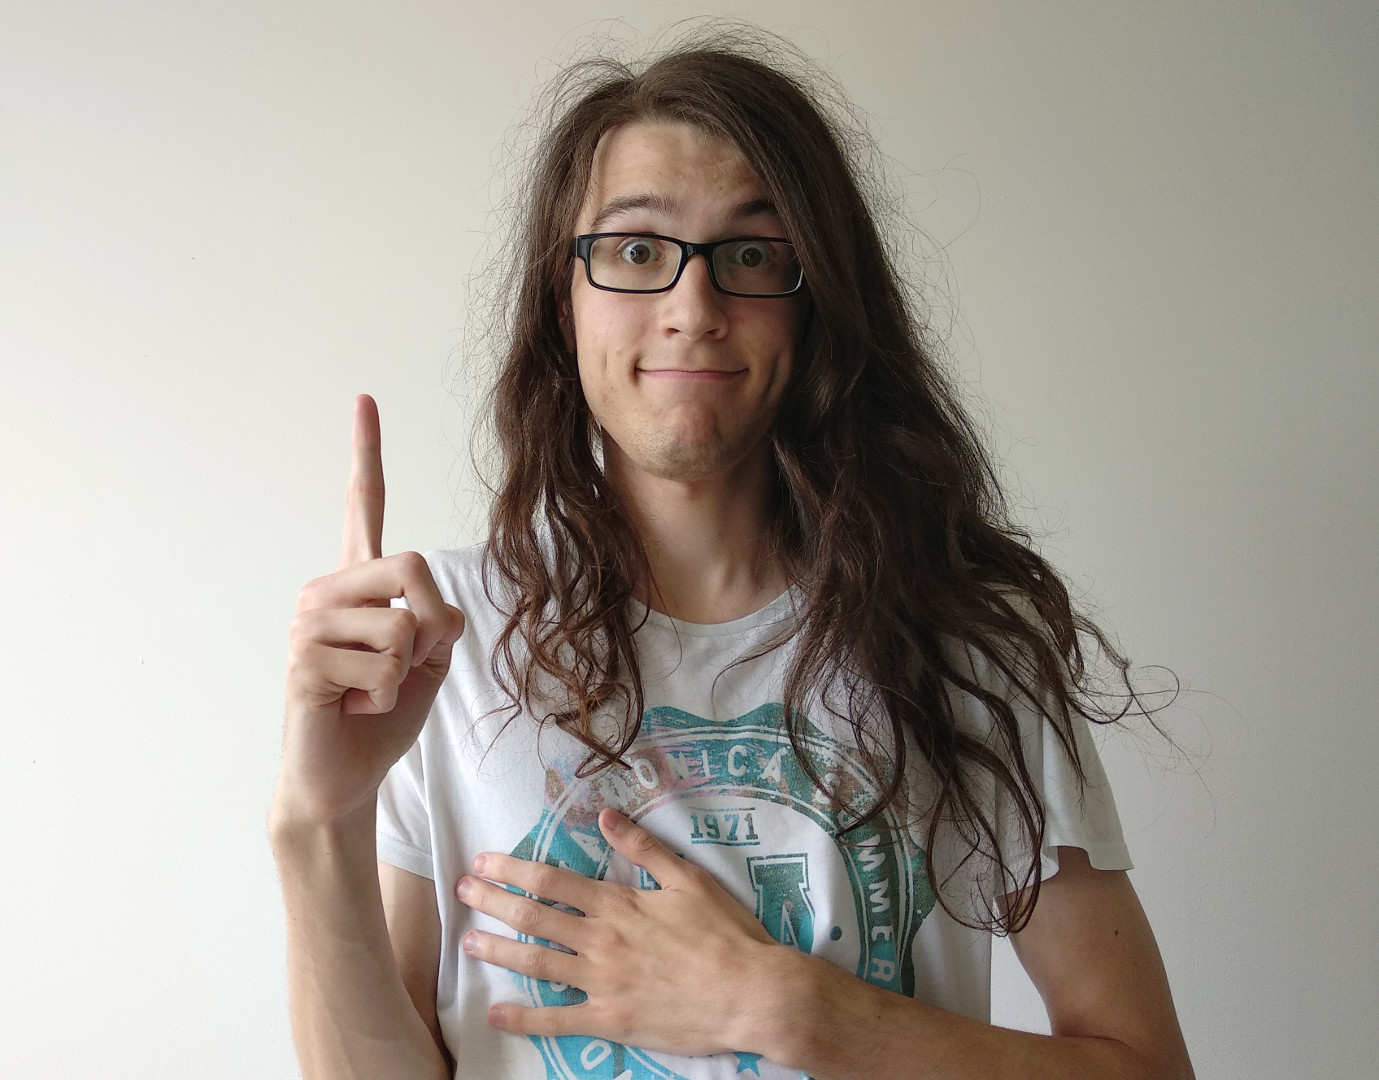 Image of myself standing, looking like a goofball with lots of long hair being all over the place